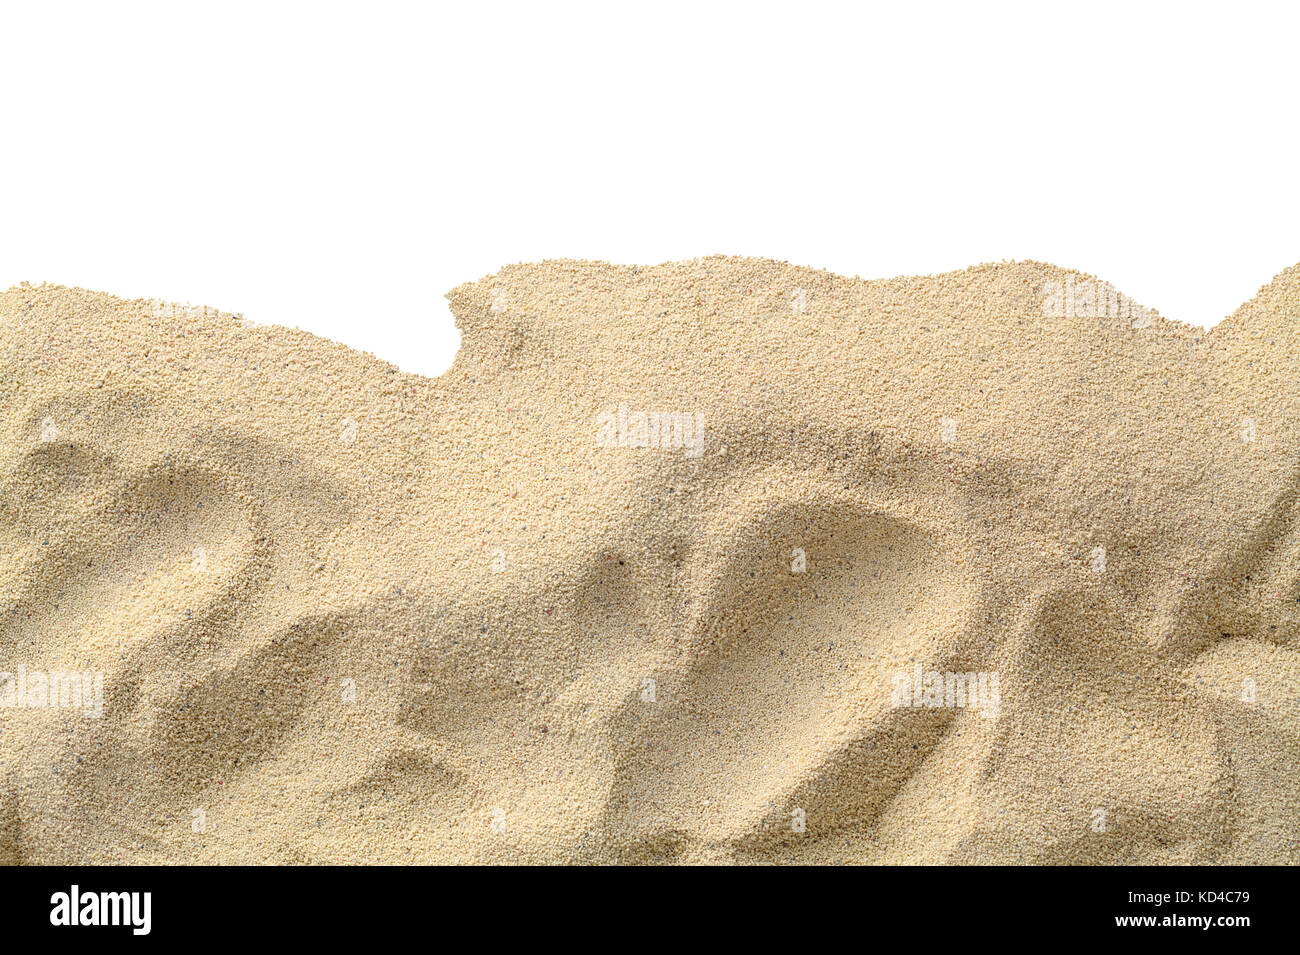 Beach Sand with Copy Space Cut Out on White. Stock Photo